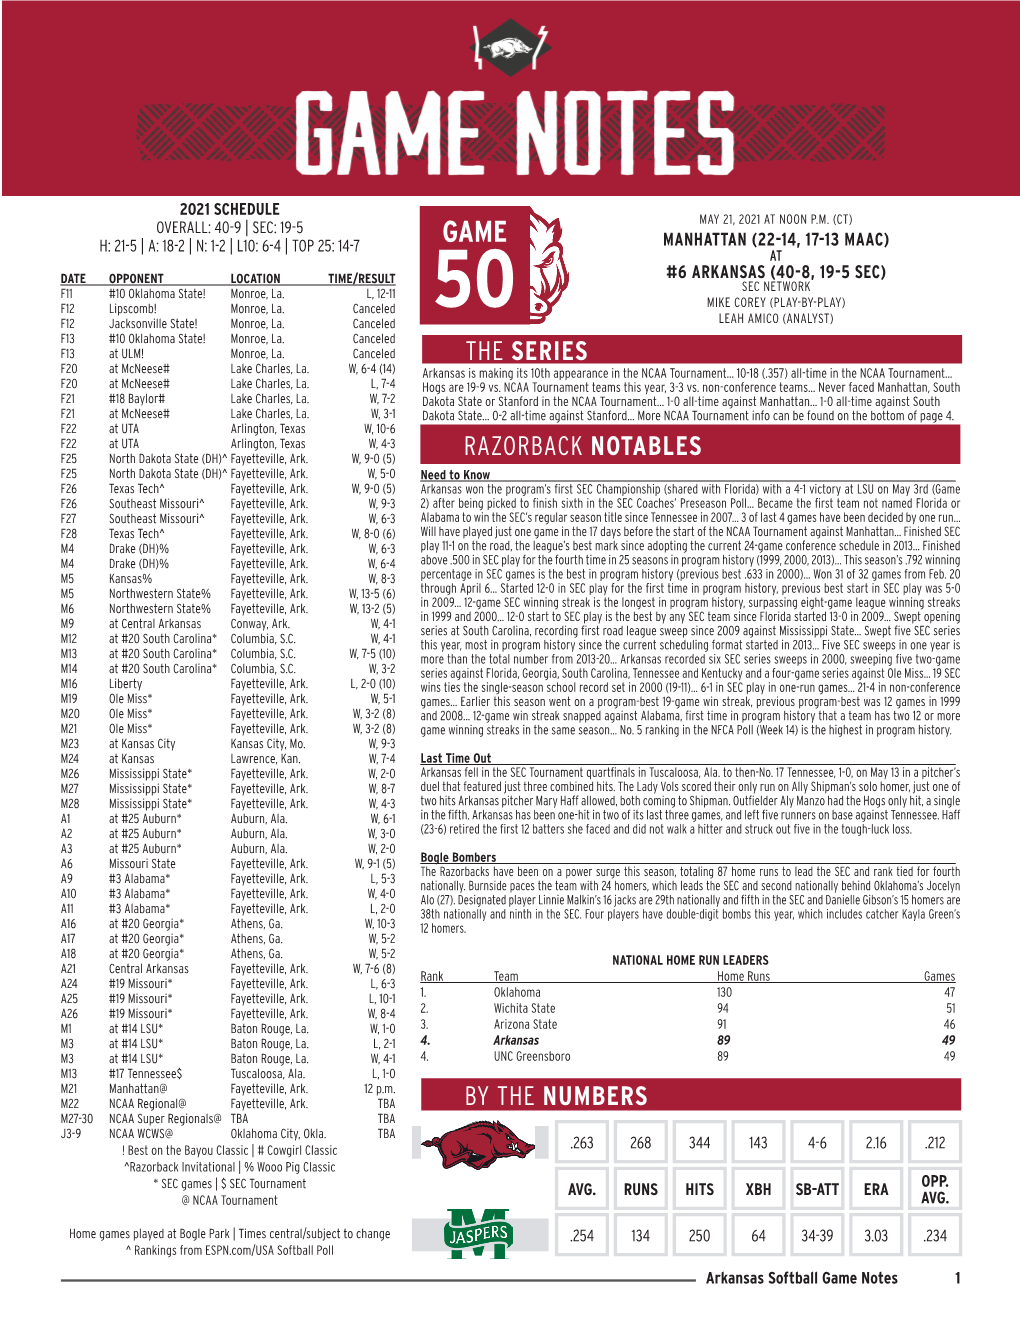 Razorback Notables by the Numbers the Series